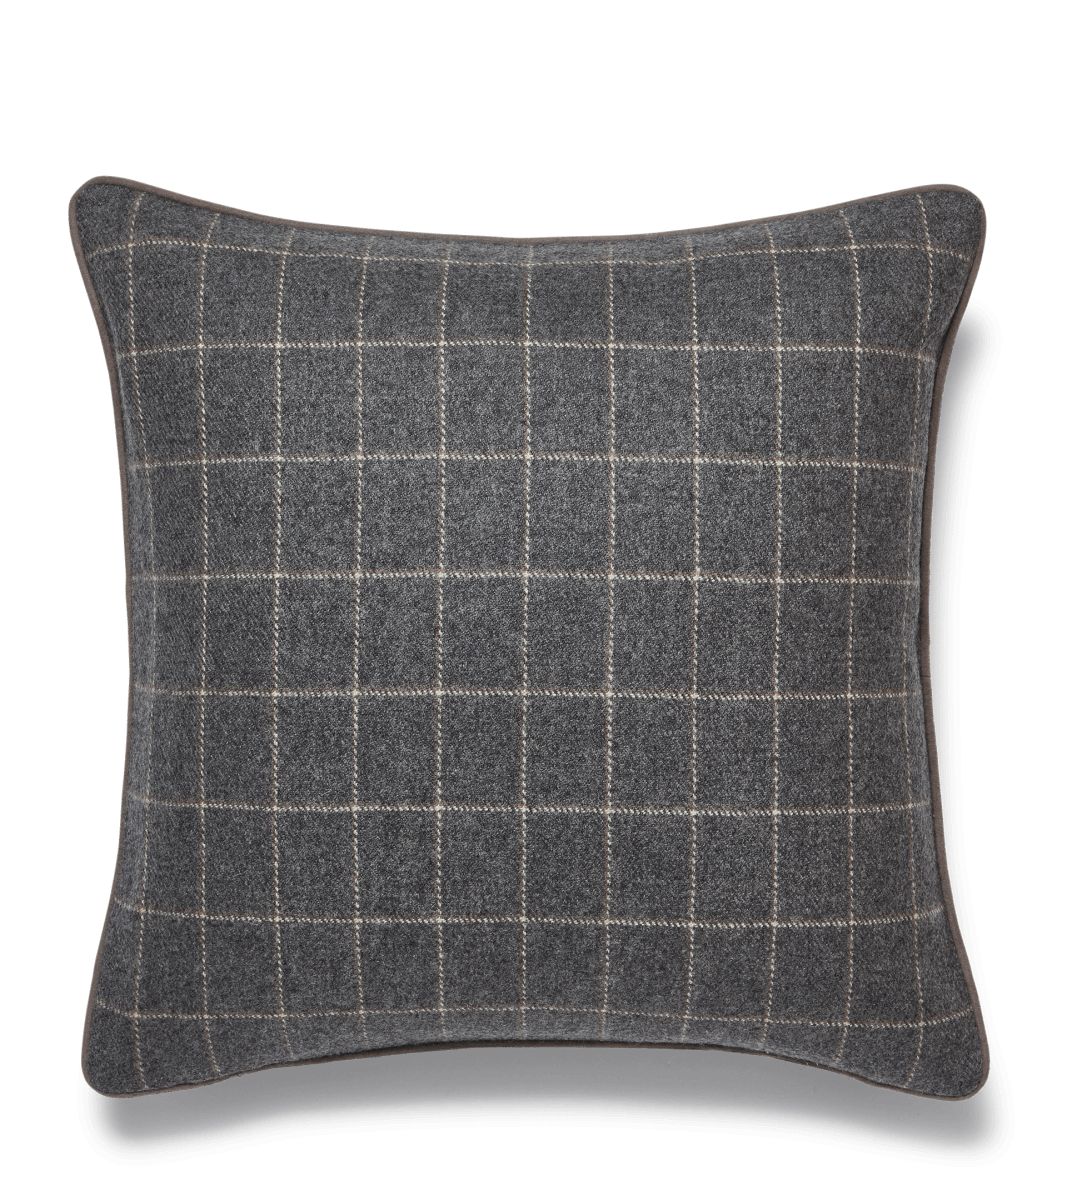 Clyde Pillow Cover - Charcoal | OKA US